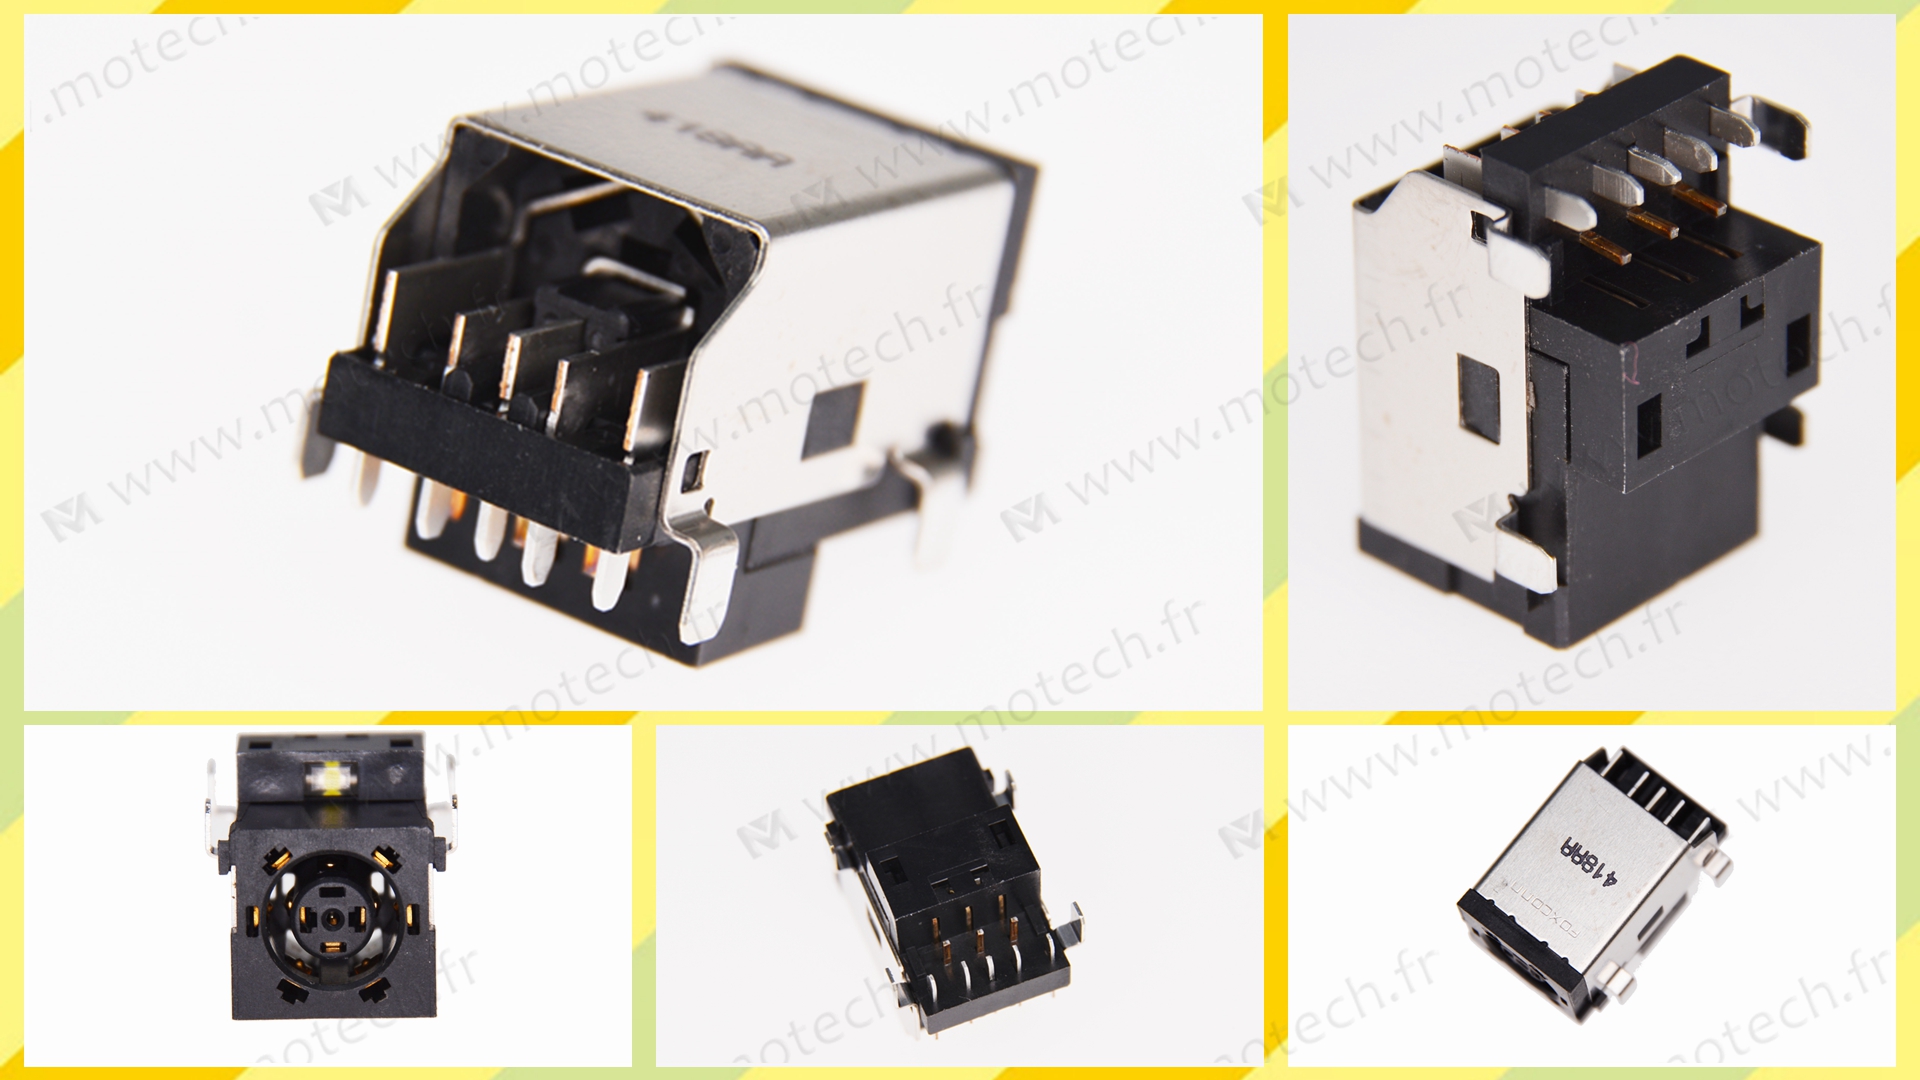 Dell 1735 charging connector, Dell 1735 DC Power Jack, Dell 1735 Power Jack, Dell 1735 plug, Dell 1735 Jack socket, Dell 1735 connecteur de charge, 